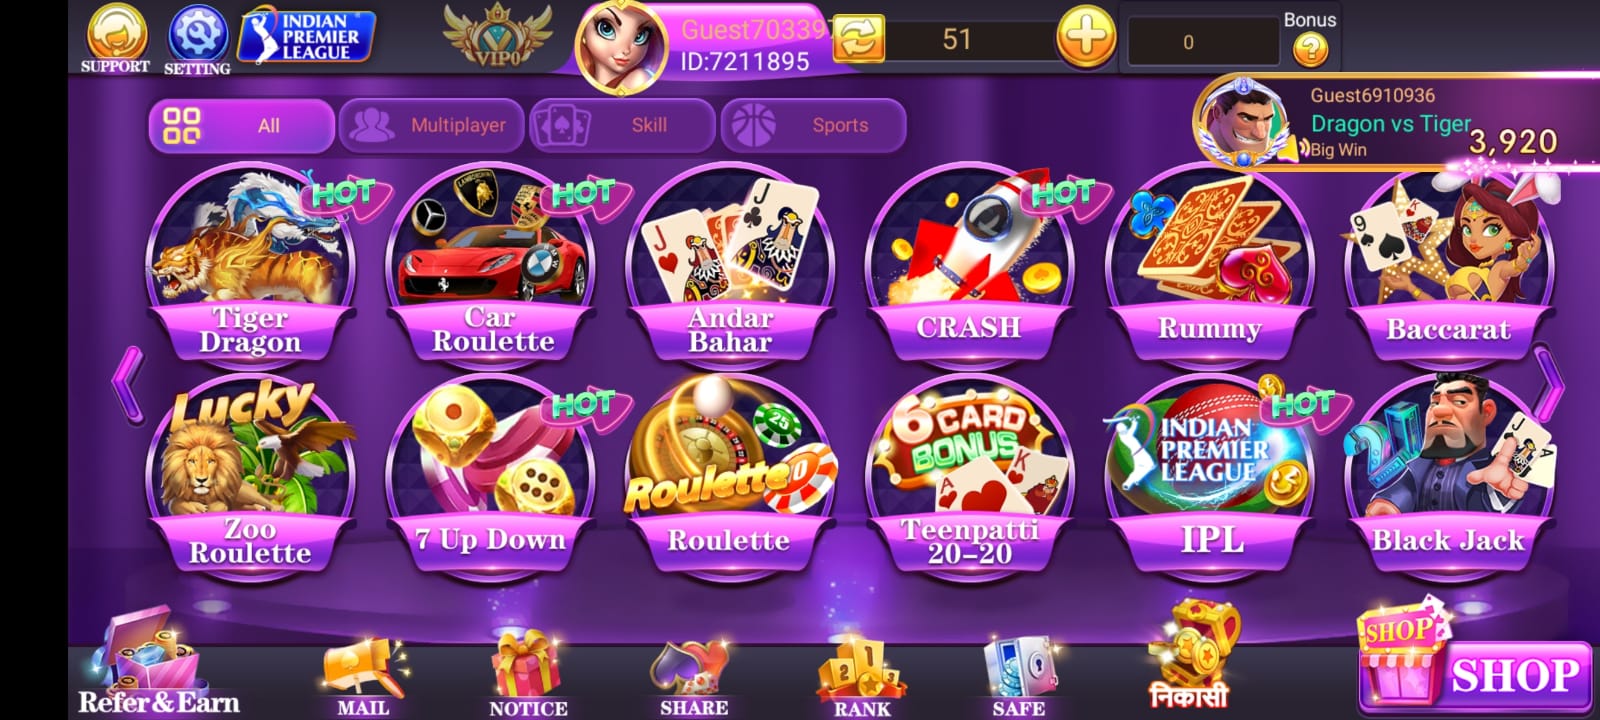 Available Game IN Rummy Holy, RummyHolly, Holi Rummy